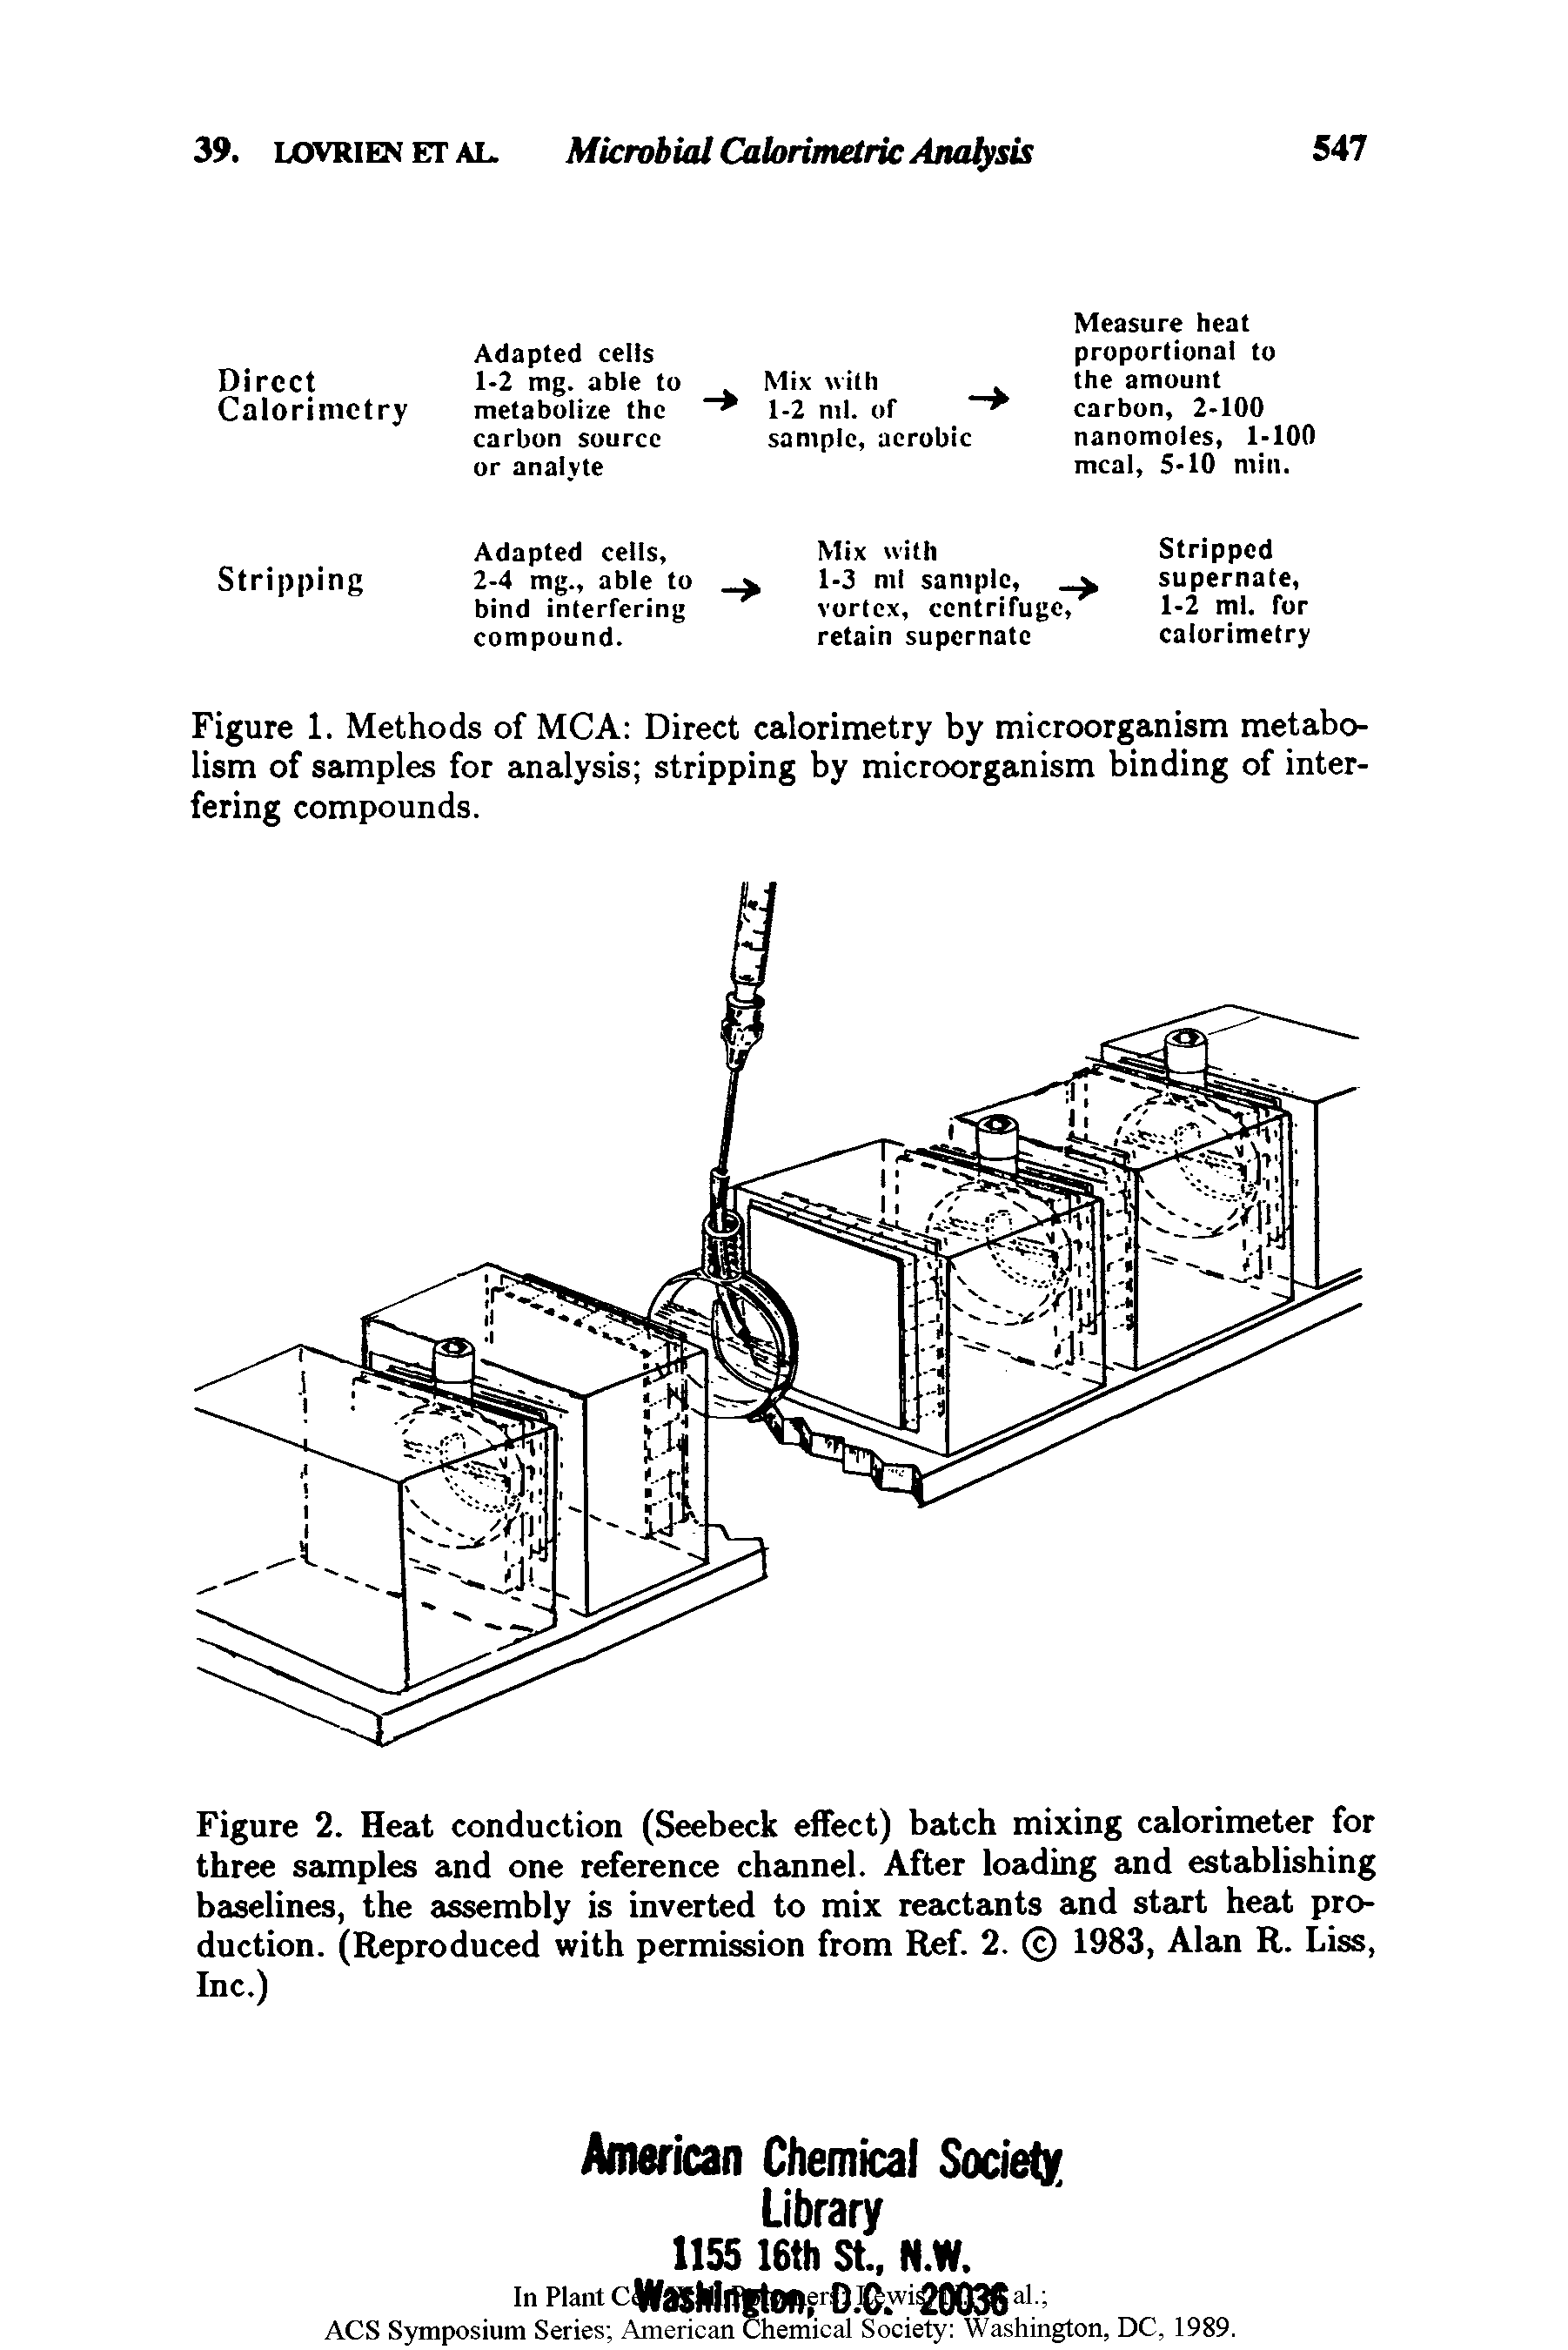 Figure 2. Heat conduction (Seebeck effect) batch mixing calorimeter for three samples and one reference channel. After loading and establishing baselines, the assembly is inverted to mix reactants and start heat production. (Reproduced with permission from Ref. 2. 1983, Alan R. Liss, Inc.)...